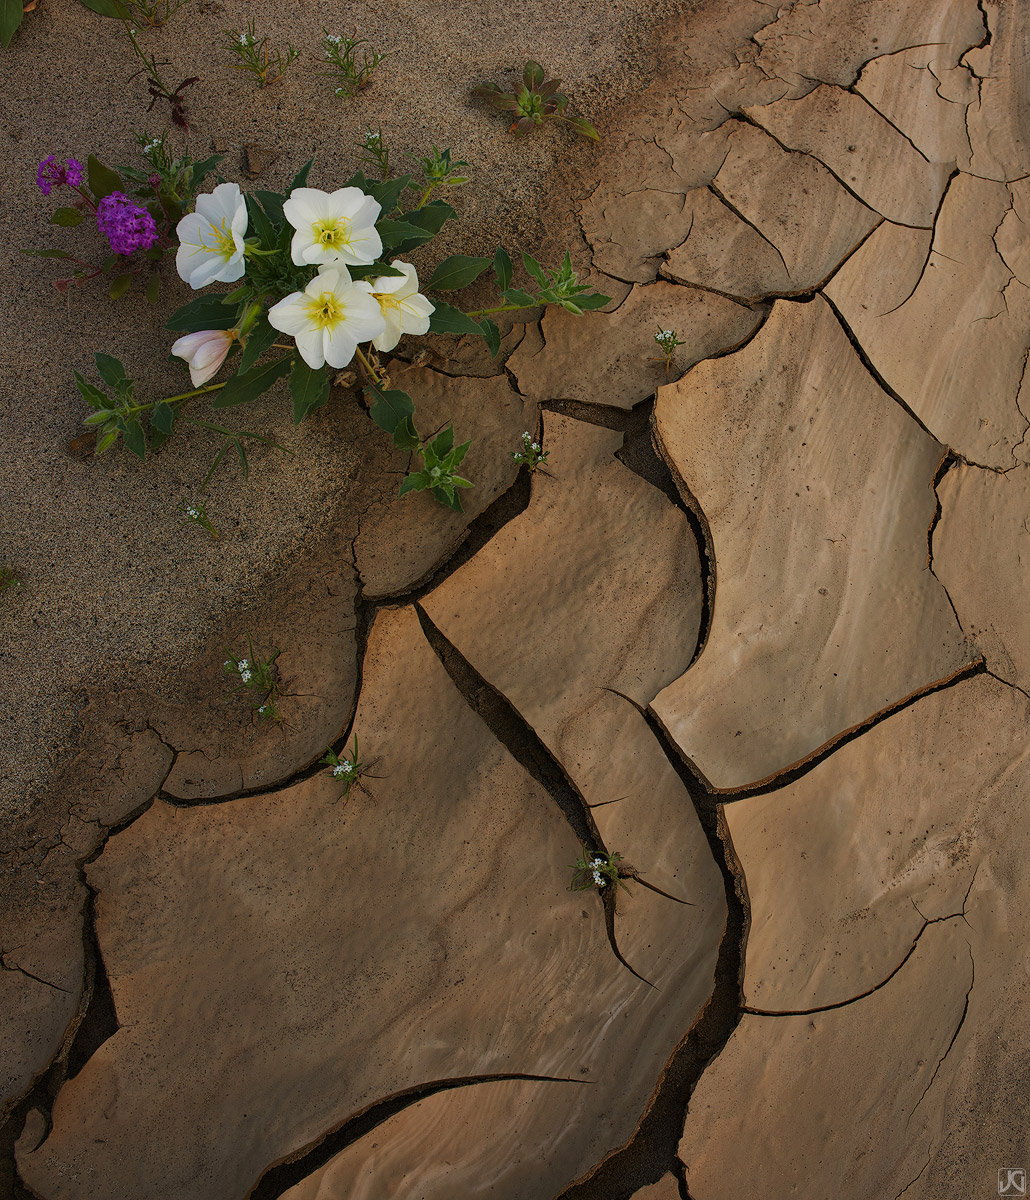 Within the vastness of a desolate desert, wildflowers thrive along the edge of a dry wash